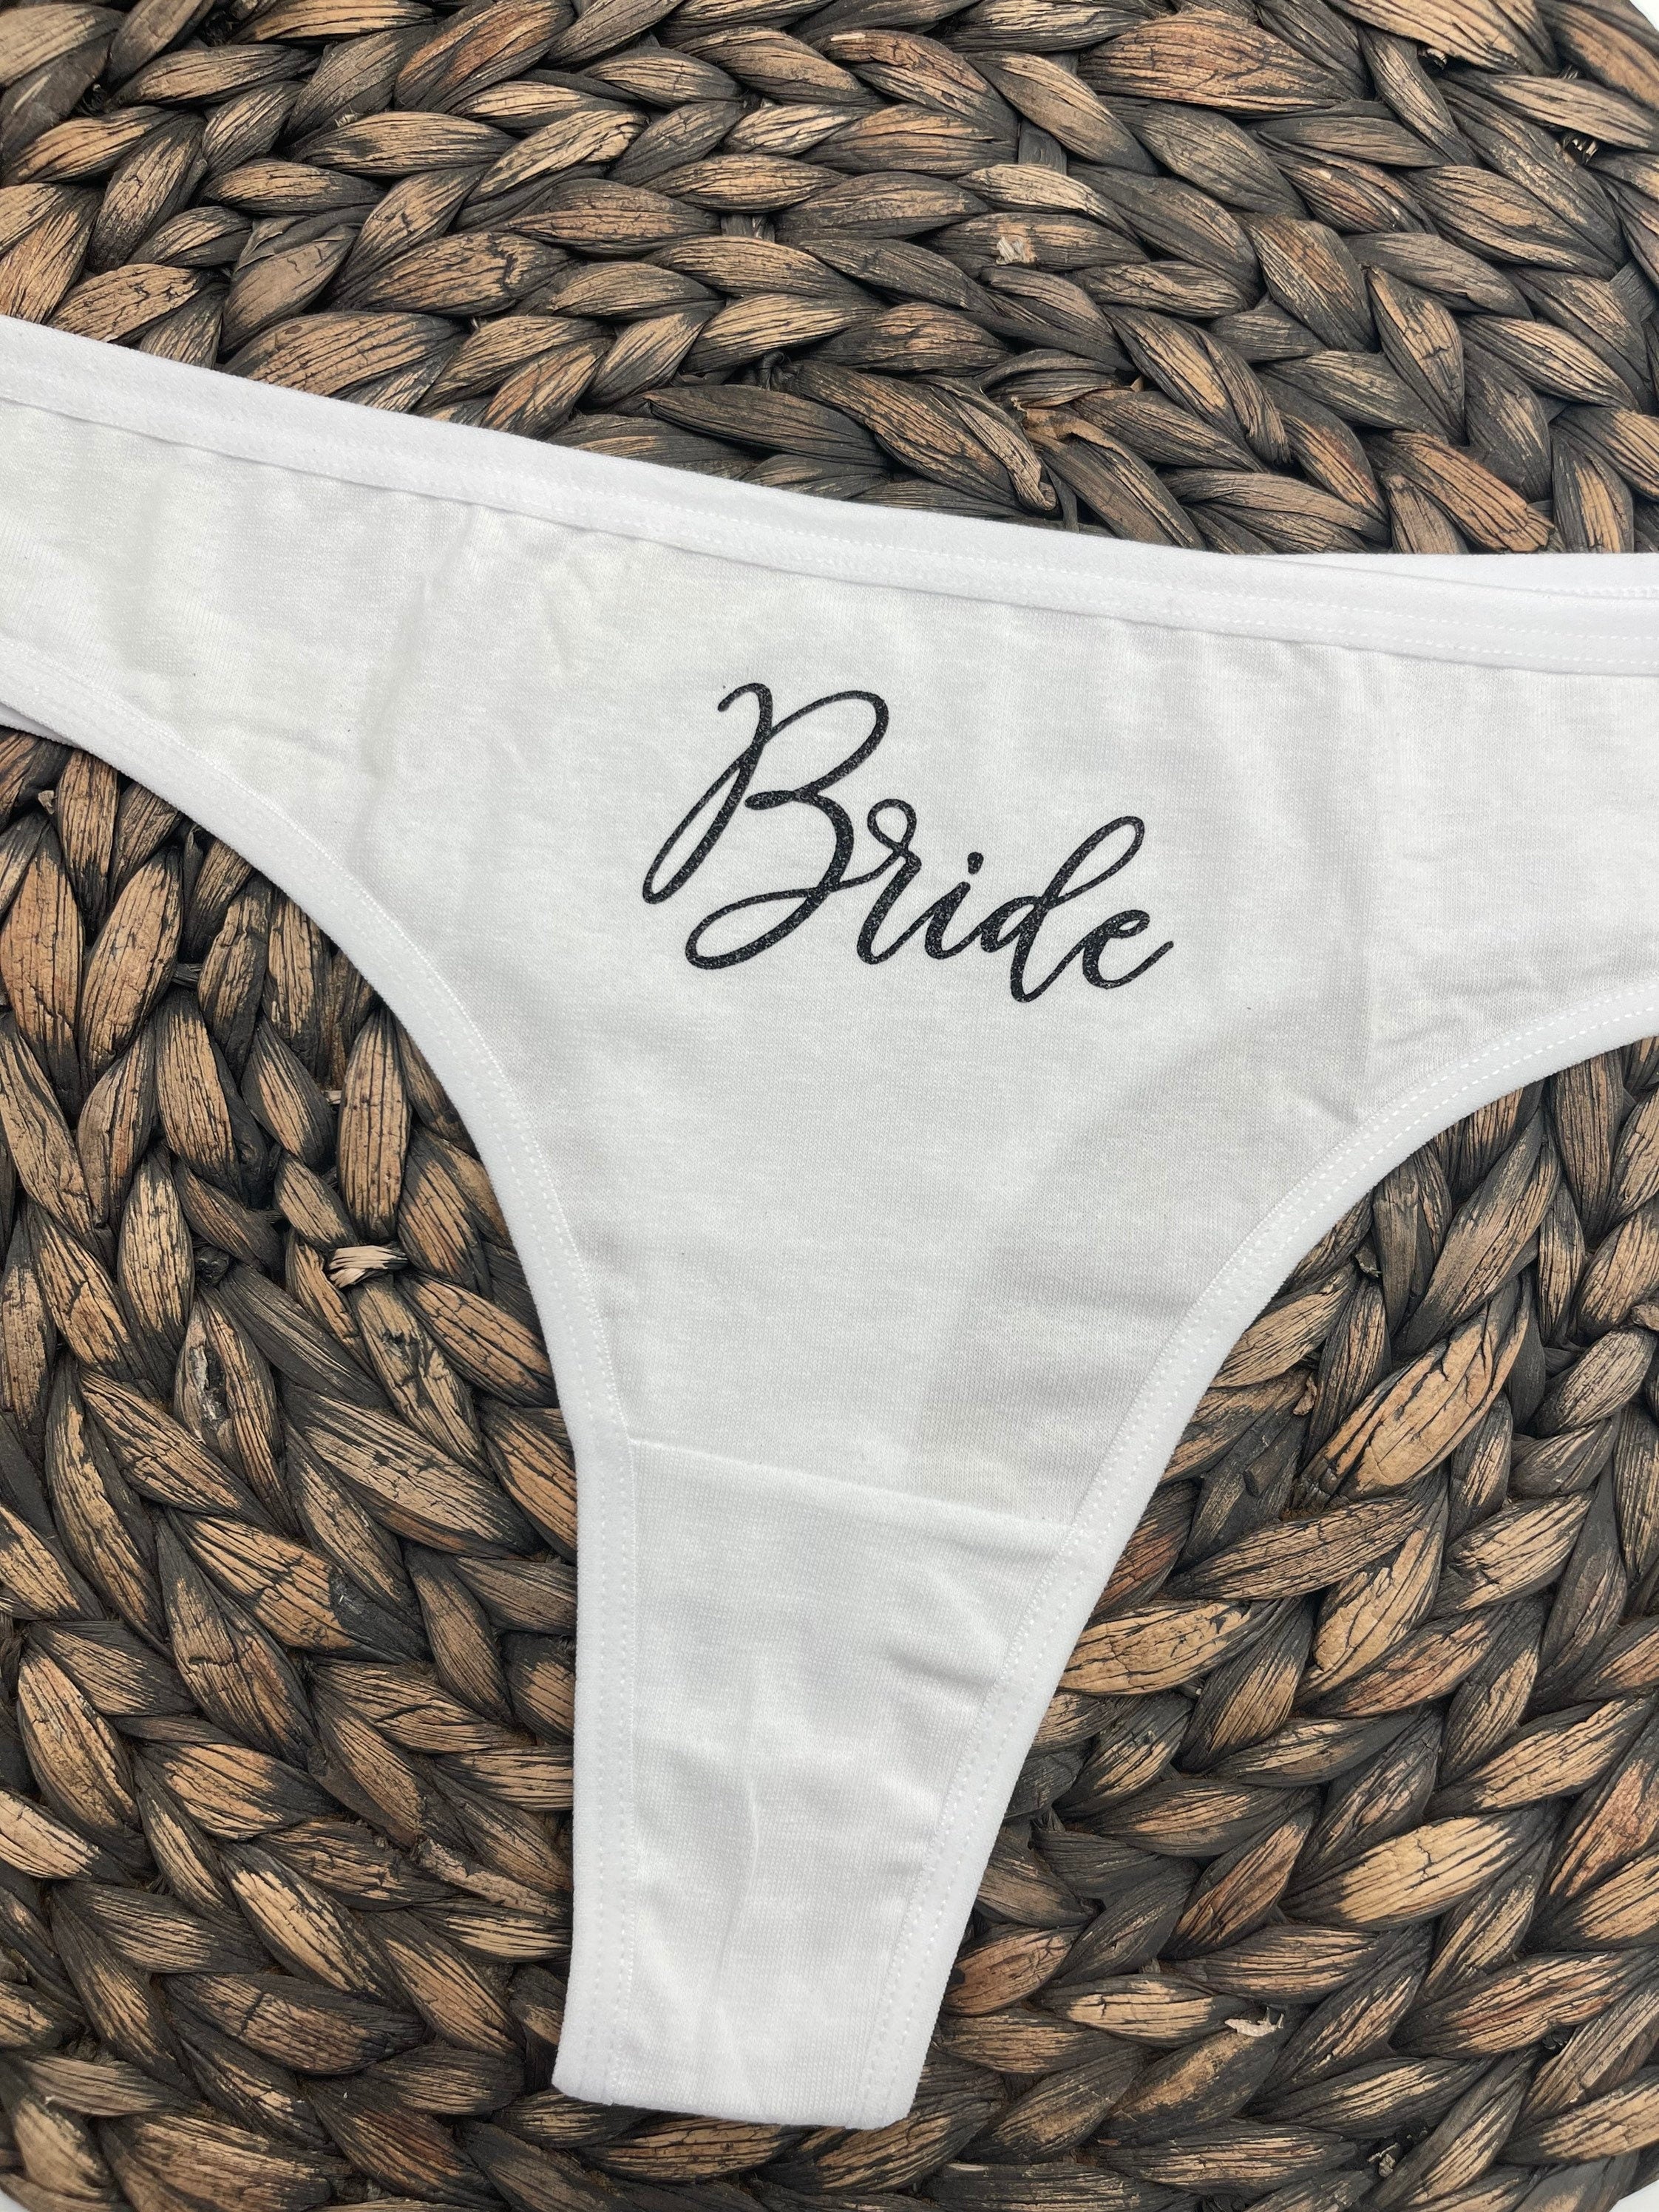 Bridal Thong with Glitter - Perfect for Bachelorette Parties & New Mrs. - Elegant Bride Underwear